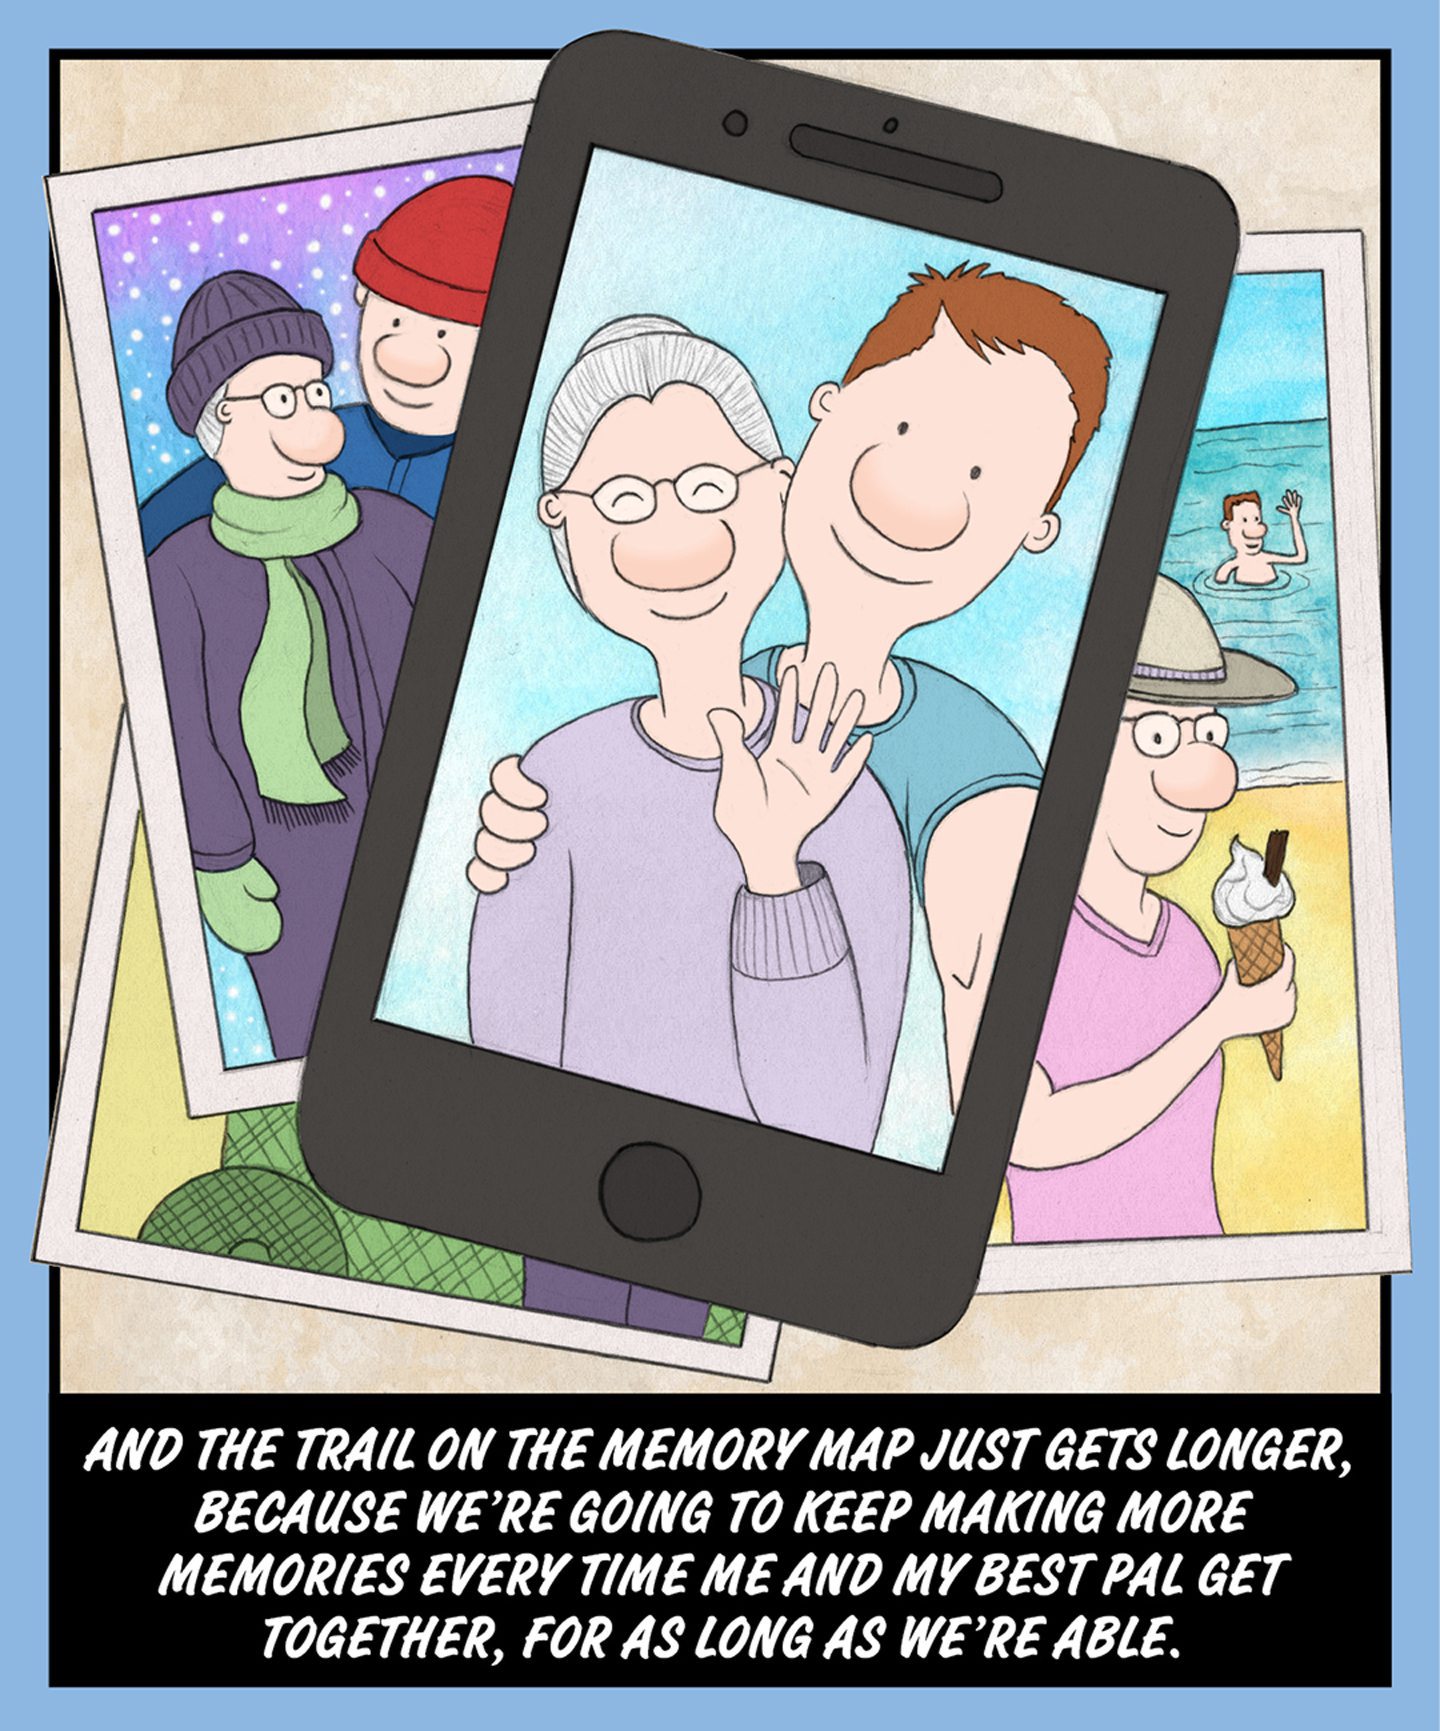 A comic illustration of a photo on a mobile phone. The text below the image reads: AND THE TRAIL ON THE MEMORY MAP JUST GETS LONGER, BECAUSE WE'RE GOING TO KEEP MAKING MORE MEMORIES EVERY TIME ME AND MY BEST PAL GET TOGETHER, FOR AS LONG AS WE'RE ABLE. 